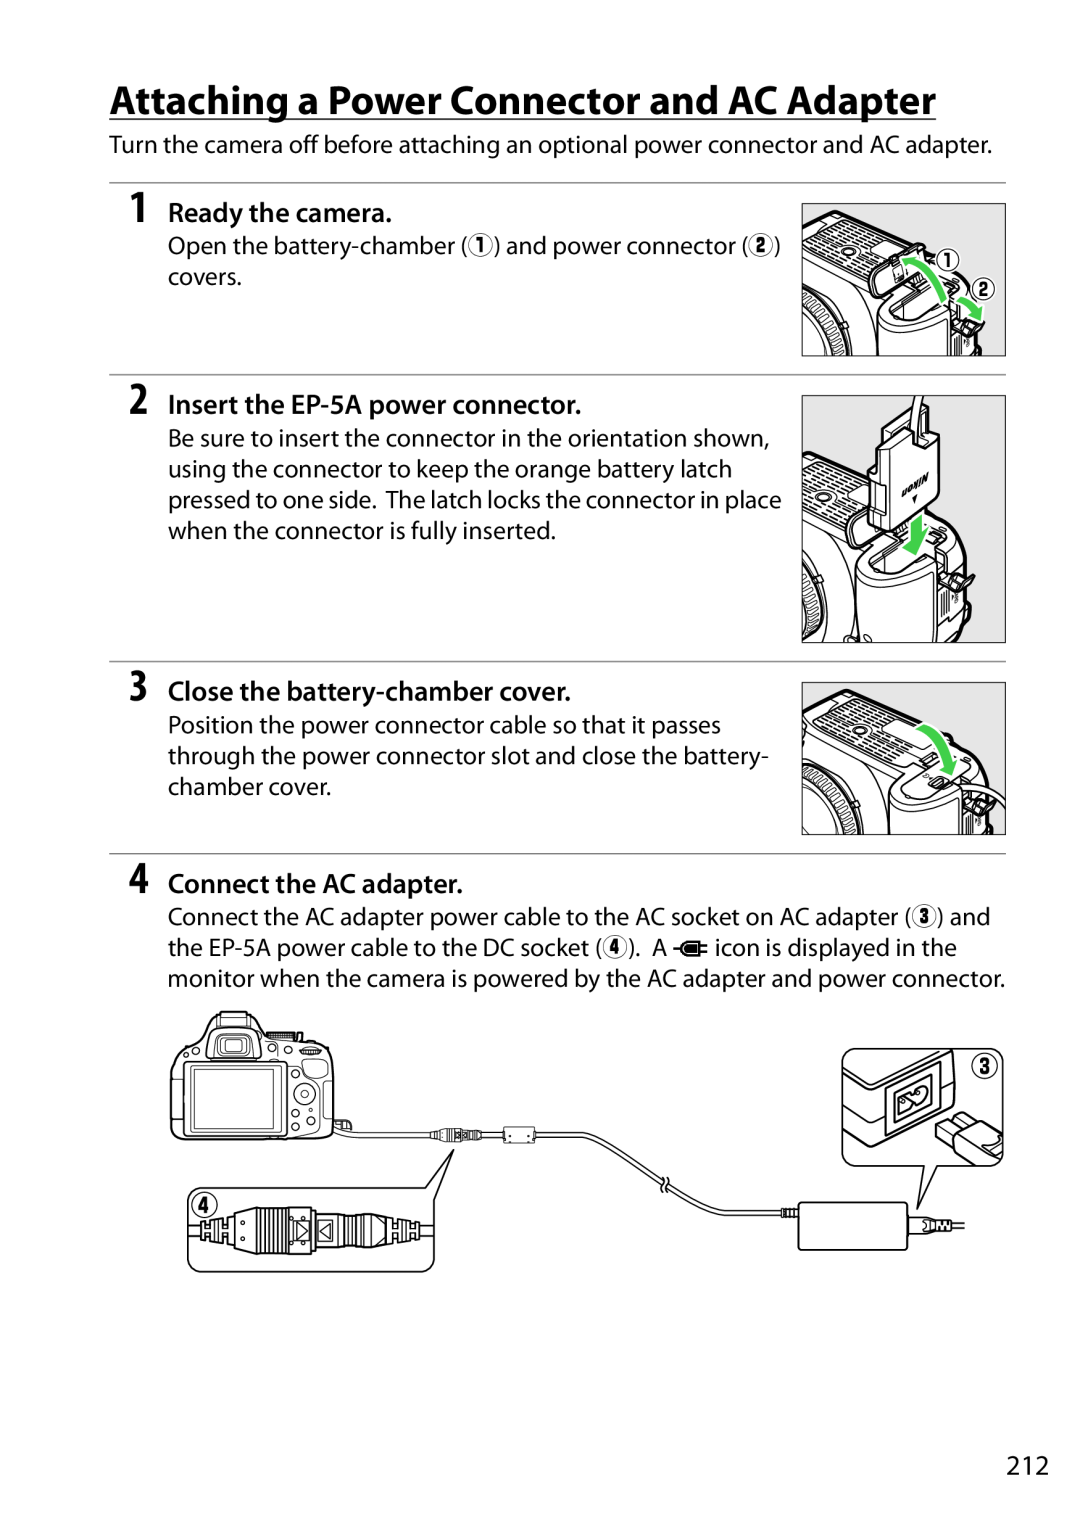 Nikon 1503 Attaching a Power Connector and AC Adapter, Insert the EP-5A power connector, Close the battery-chamber cover 